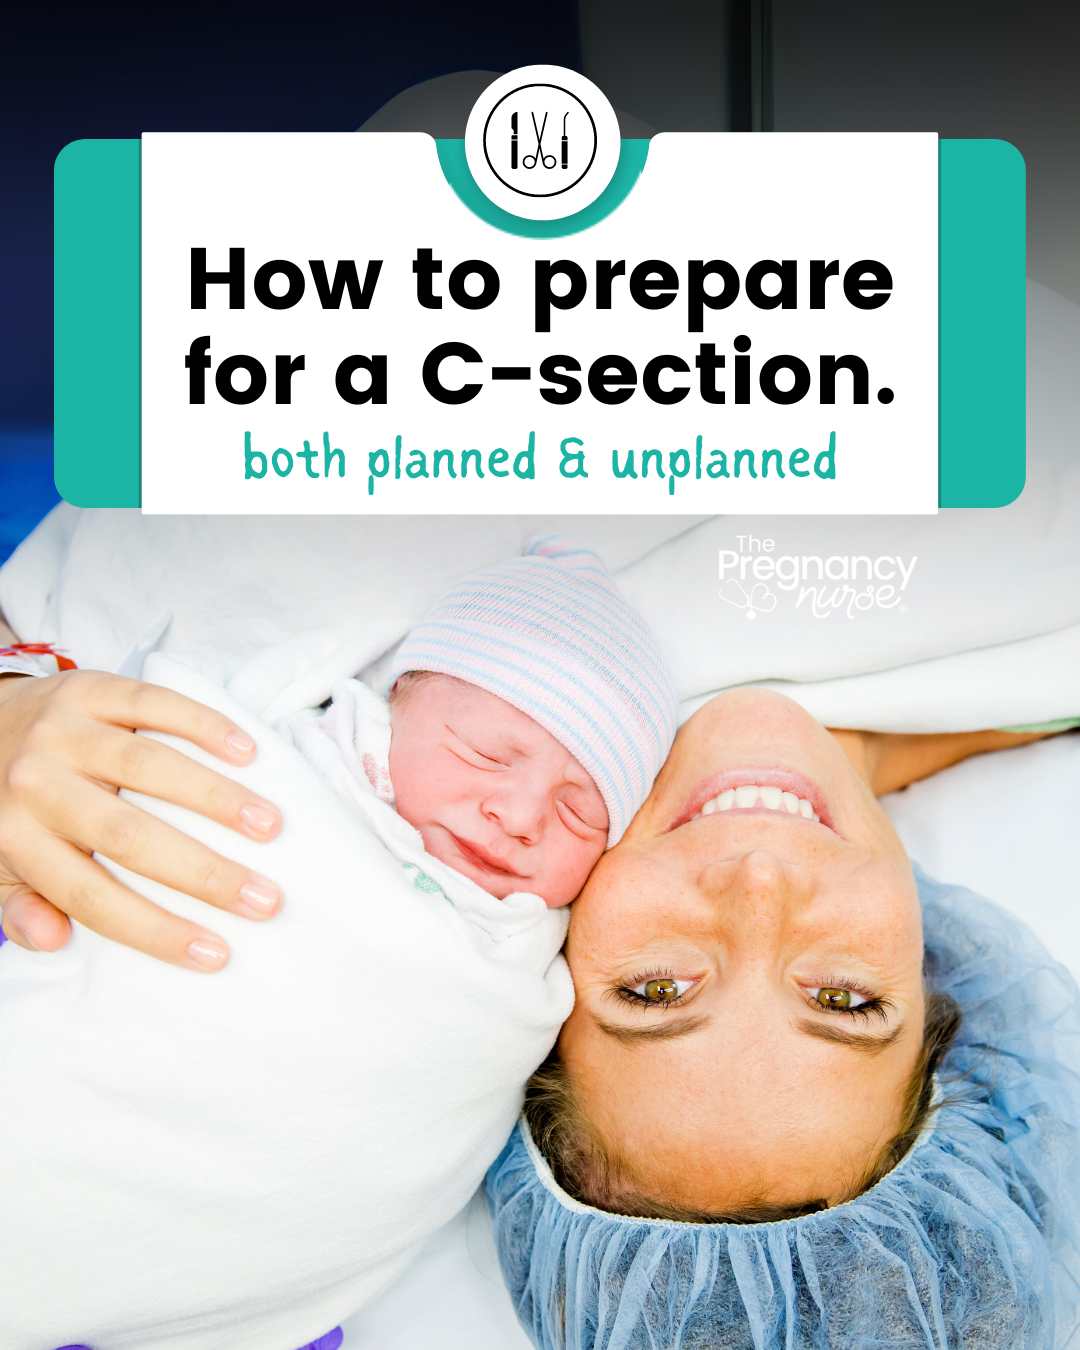 "Embark on a well-prepared journey for your upcoming C-section with our comprehensive guide. From crafting a detailed birth plan to understanding the nuances of recovery, we've curated expert advice to ensure you feel confident and ready. Pin this invaluable resource for a smooth and stress-free C-section experience. Explore essential tips and insights to make your motherhood journey truly special. #CSectionPreparation #BirthPlan #MotherhoodTips #CSectionGuide #PregnancyJourney"